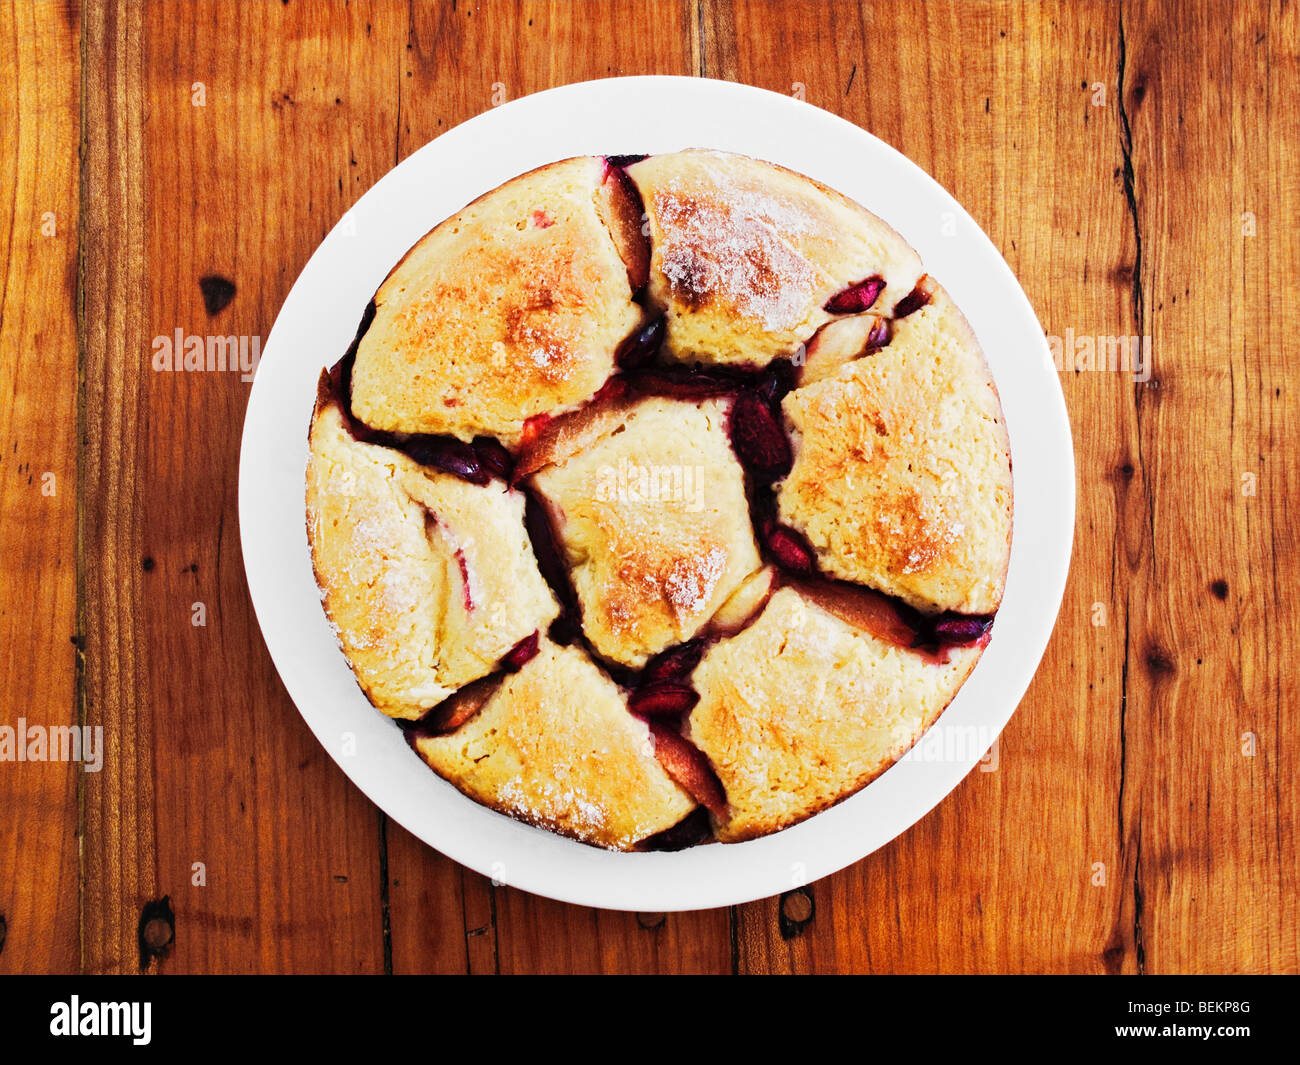 Austrian Bread Dumpling With Fruit On Rustic Wooden Table Stock Photo